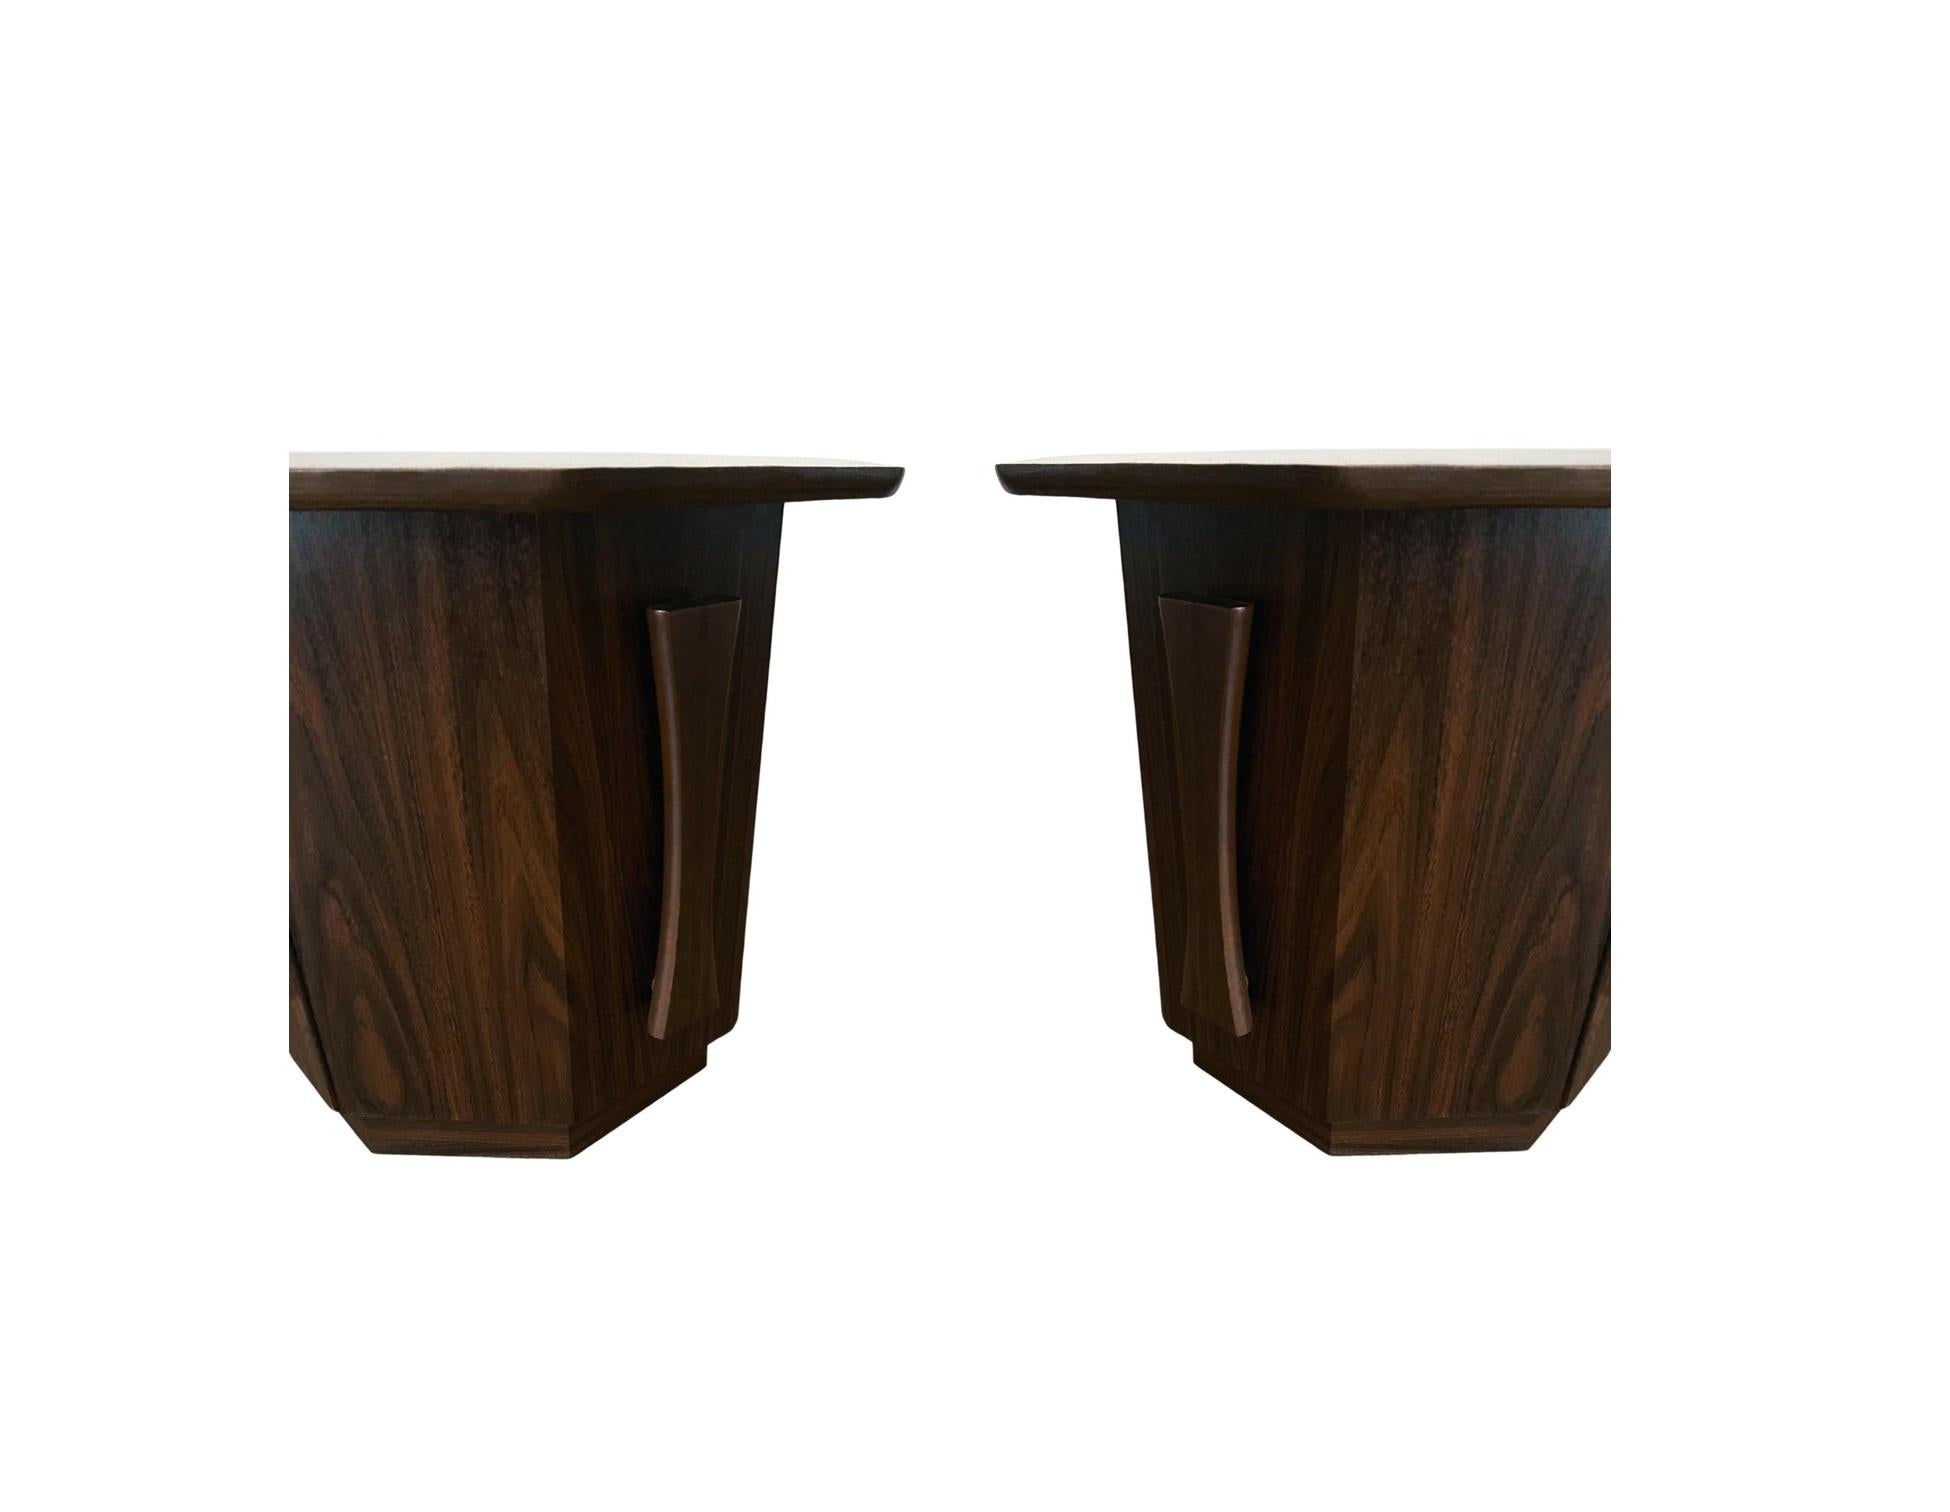 Wood Pair of Brutalist Octagonal Cabinets / Bedside Tables, c. 1960's For Sale